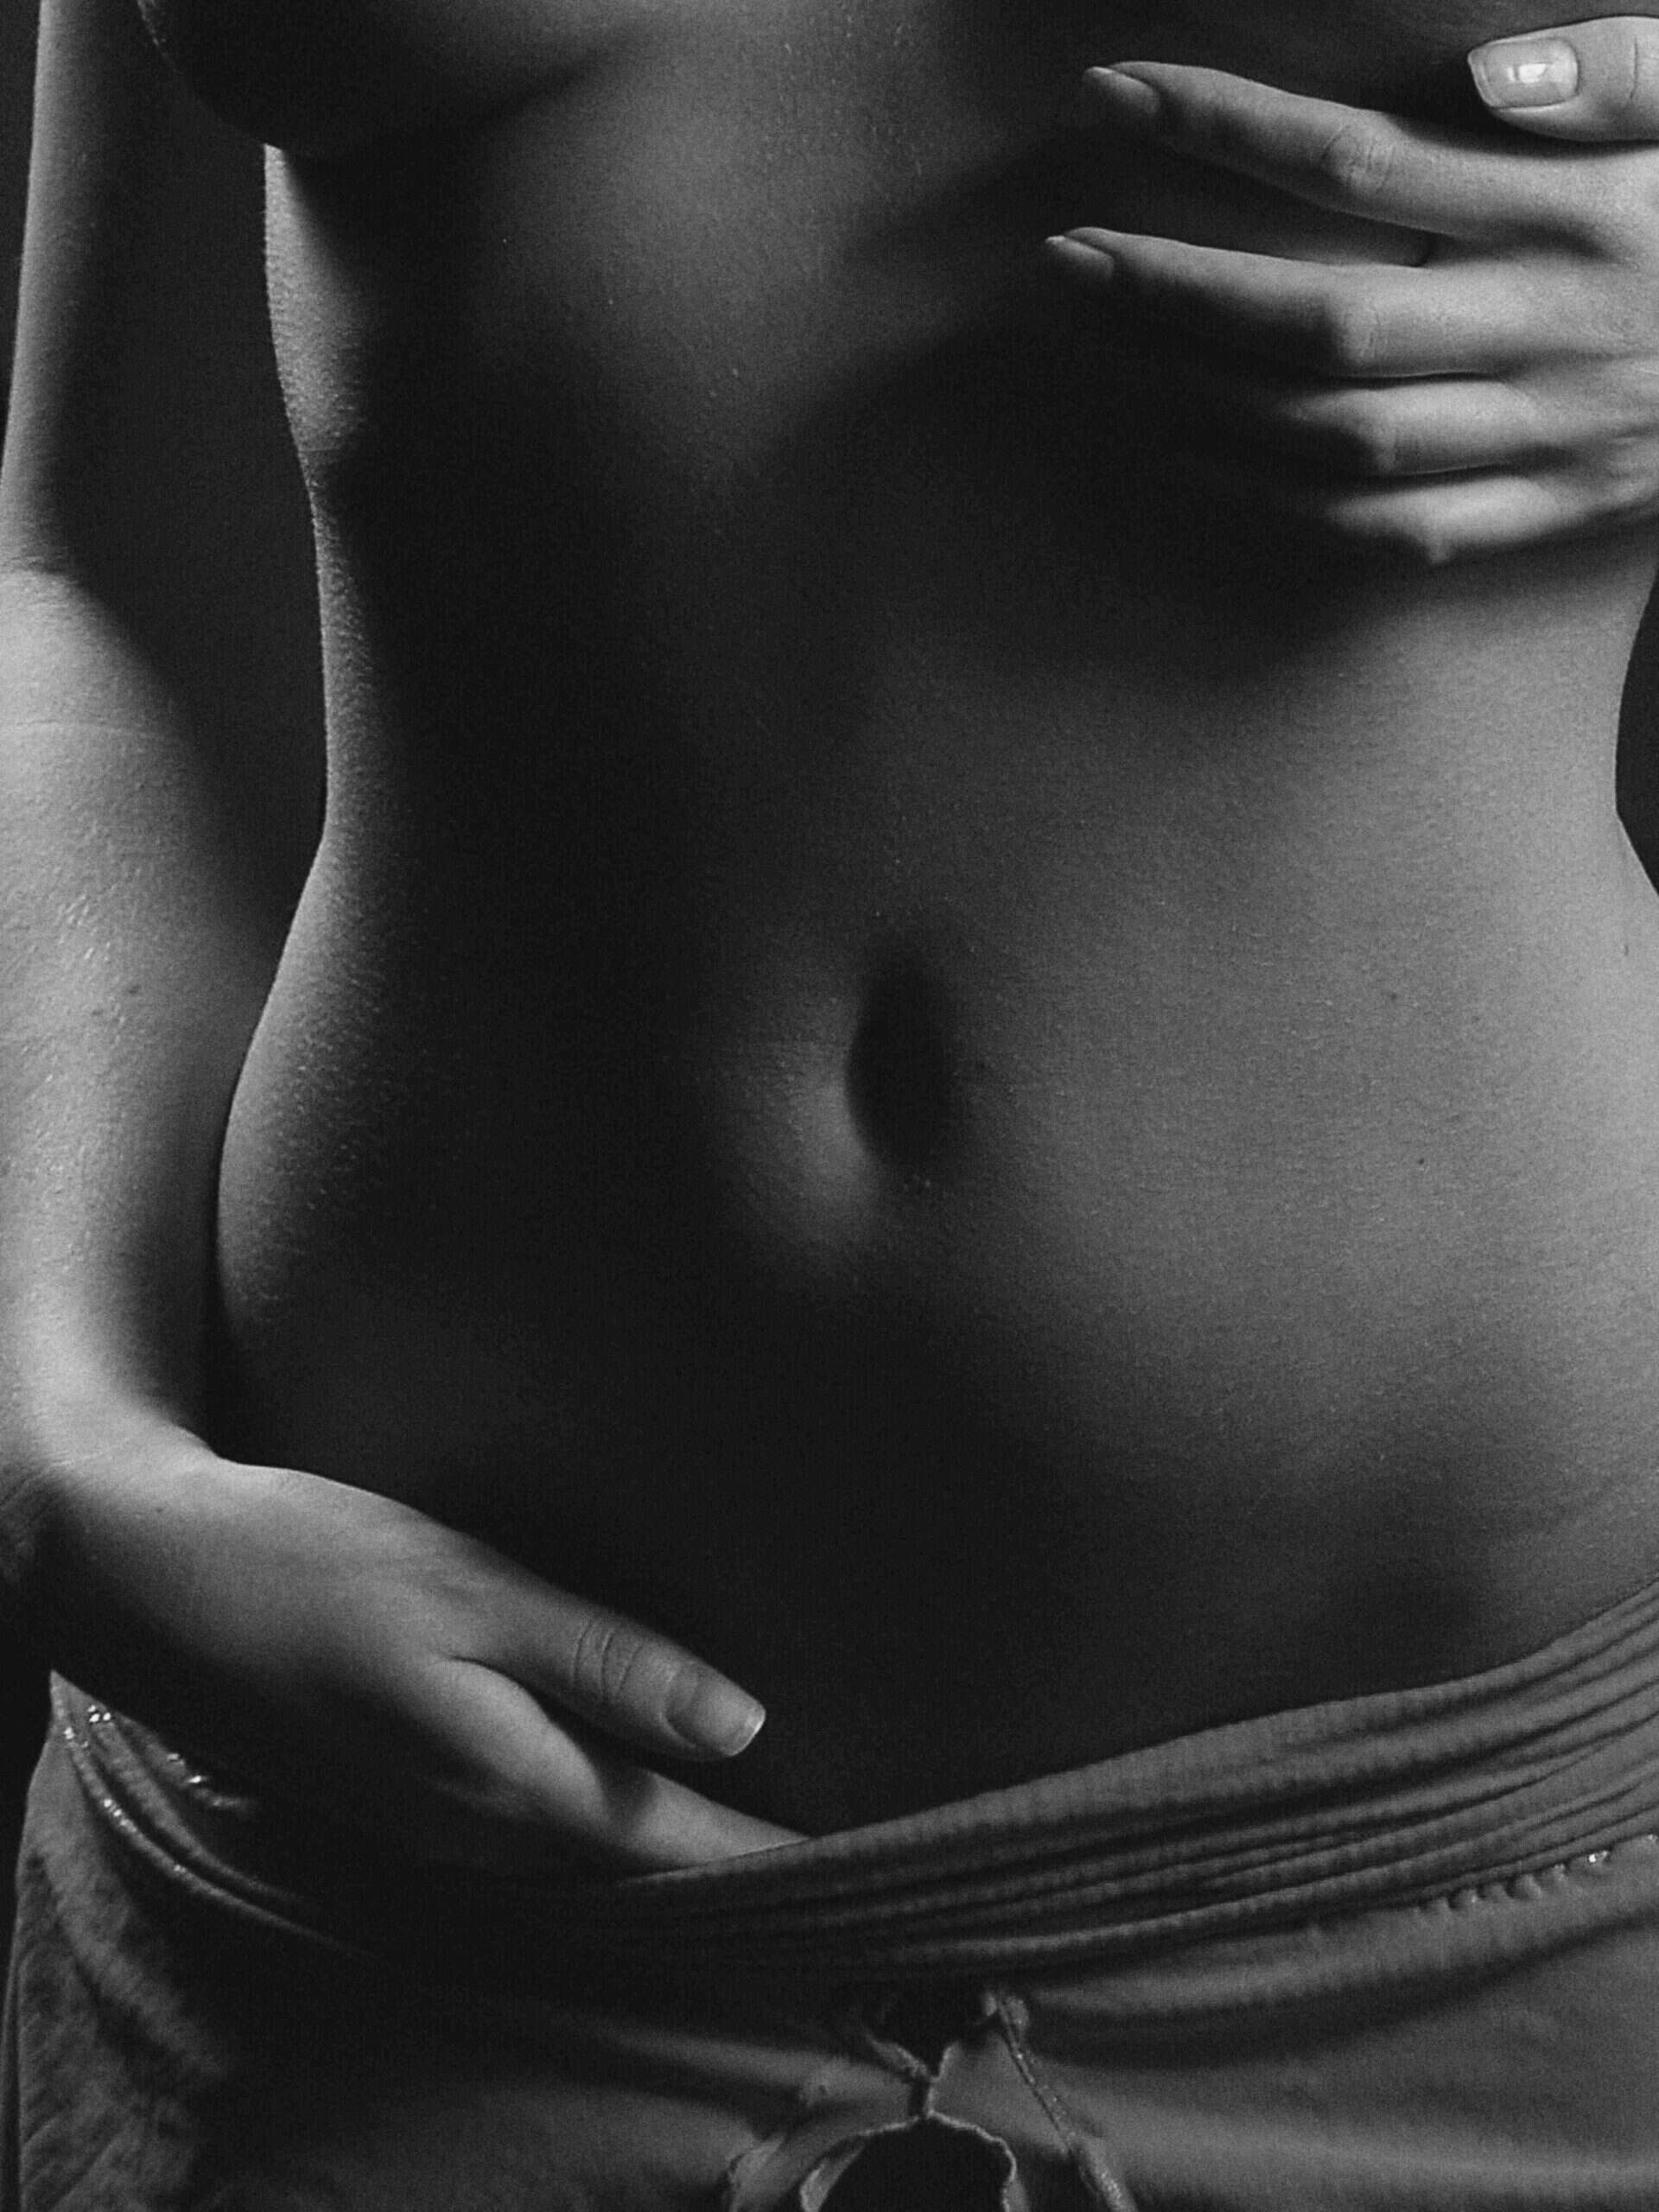 Woman's Stomach with Stretch Marks | Prick'd Medspa in St. Louis, MO